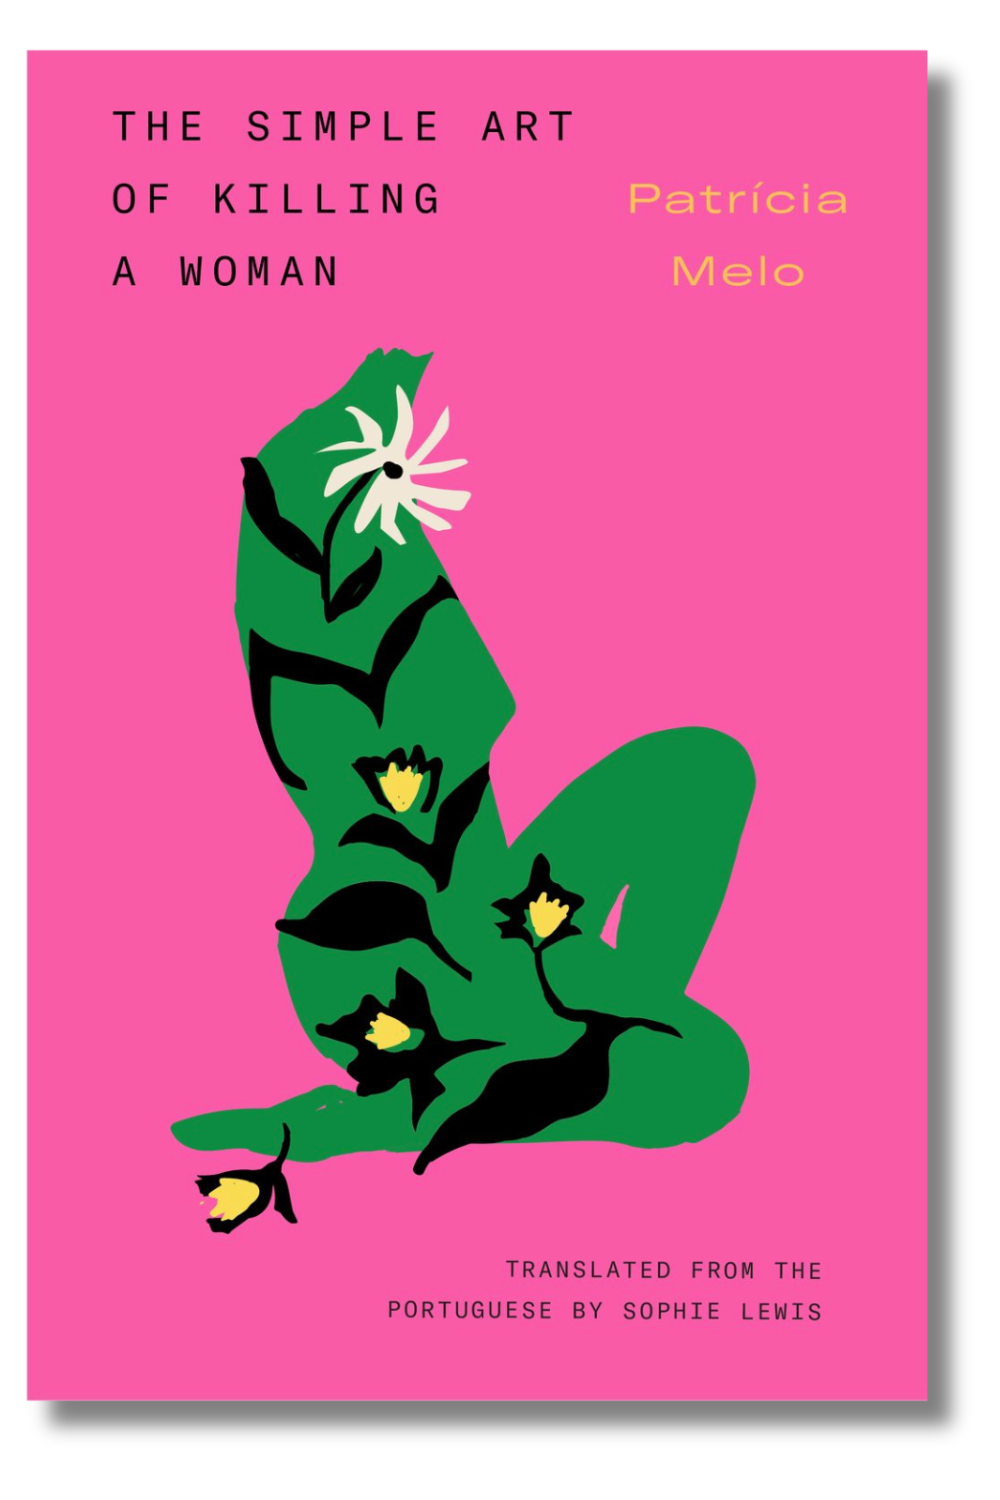 The cover of "The Simple Art of Killing a Woman" by Patricia Melo, tr. by Sophie Lewis